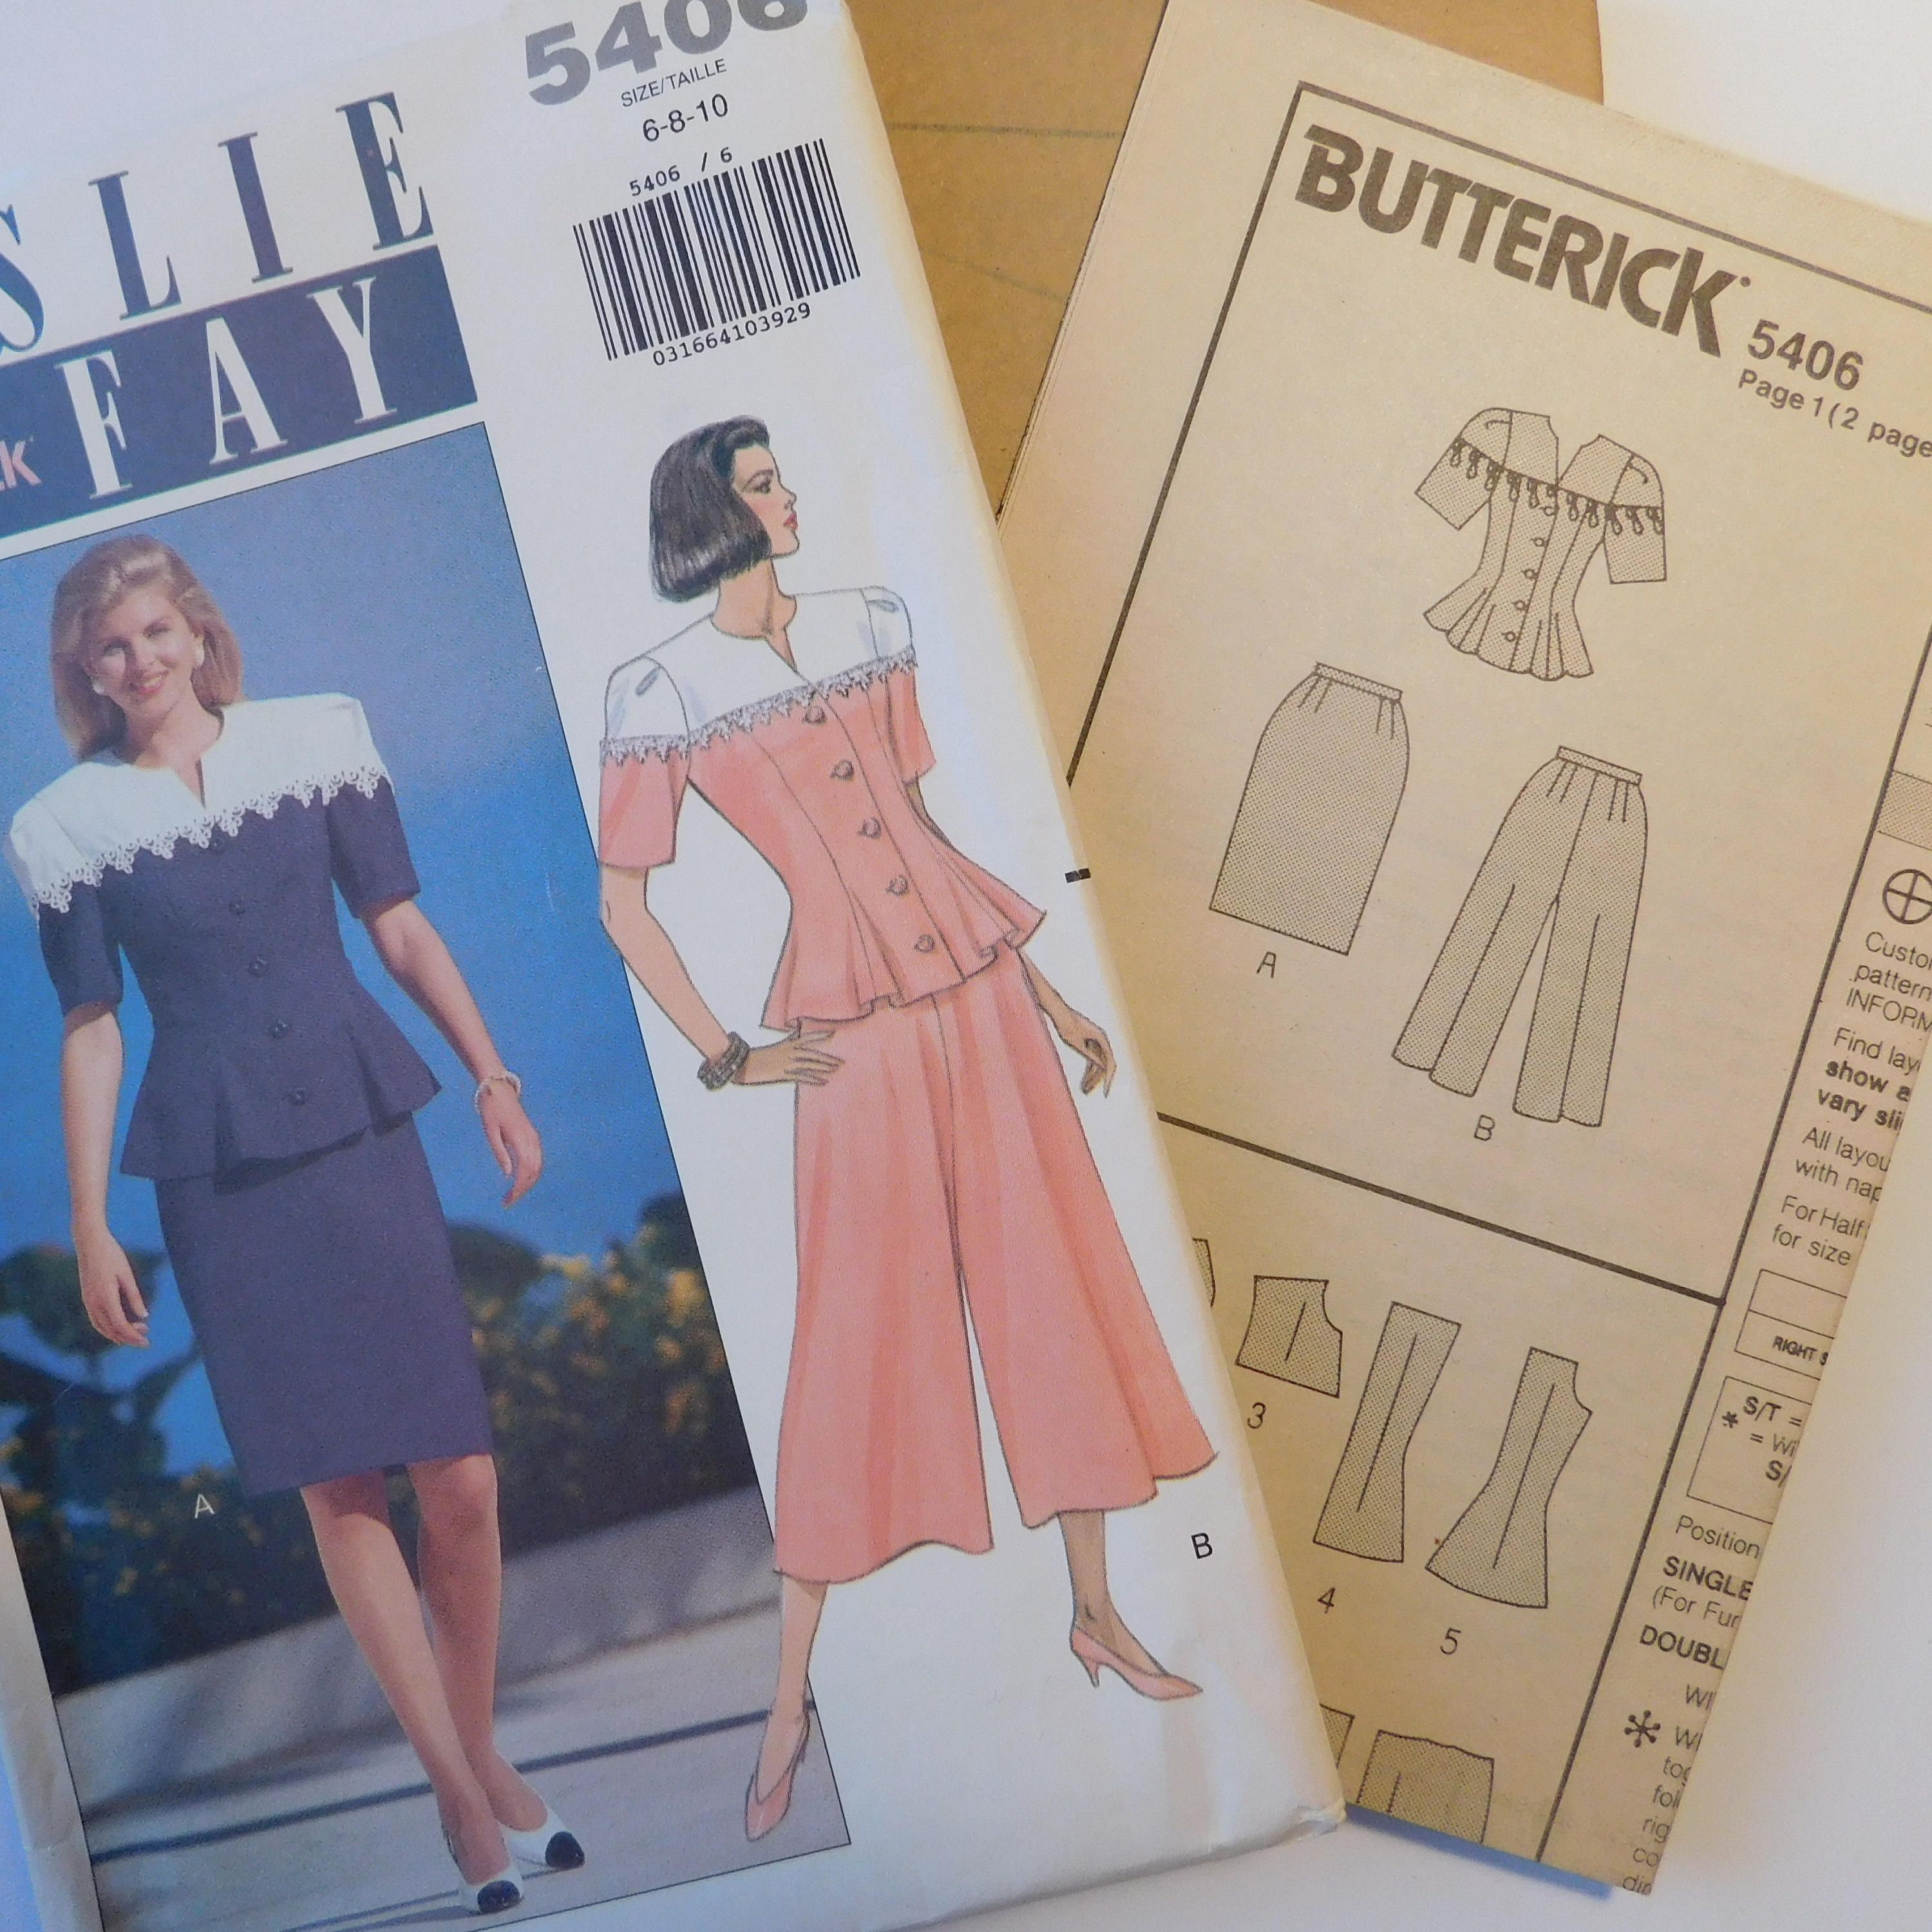 Leslie Fay for Butterick Classic Vintage Sewing Pattern 5406 | Etsy